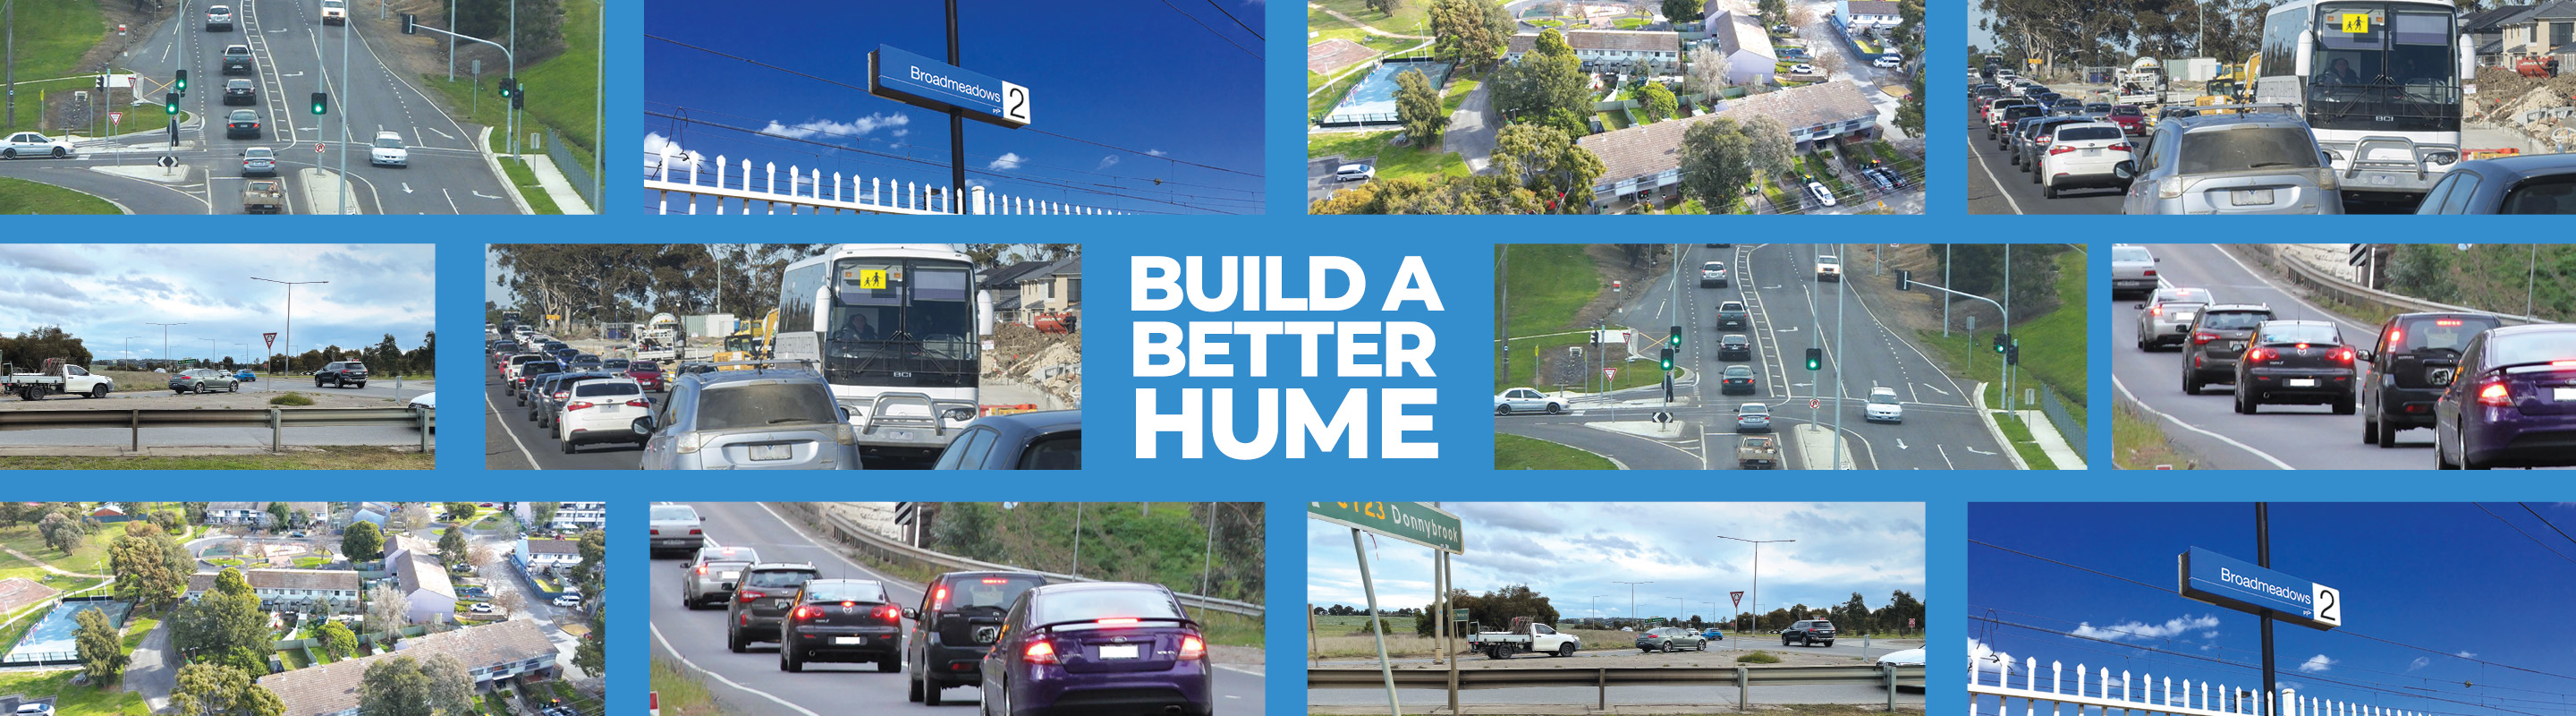 Website Rolling Banner - Advocacy Build a Better Hume.jpg